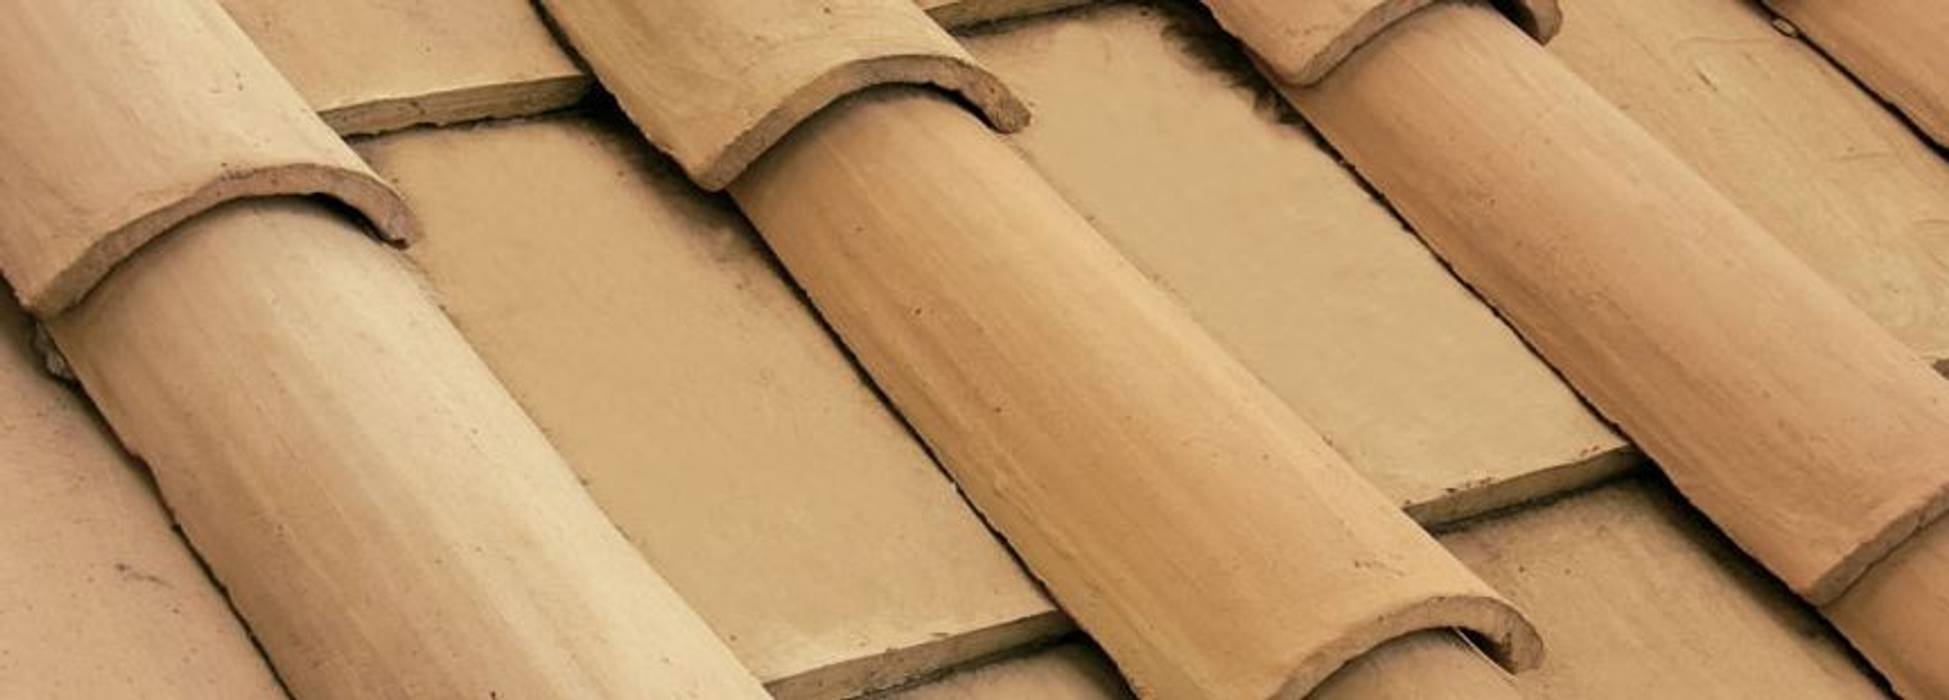 Handcrafted terracotta building materials for renovation and restoration Terrecotte Europe Commercial spaces Stone Museums